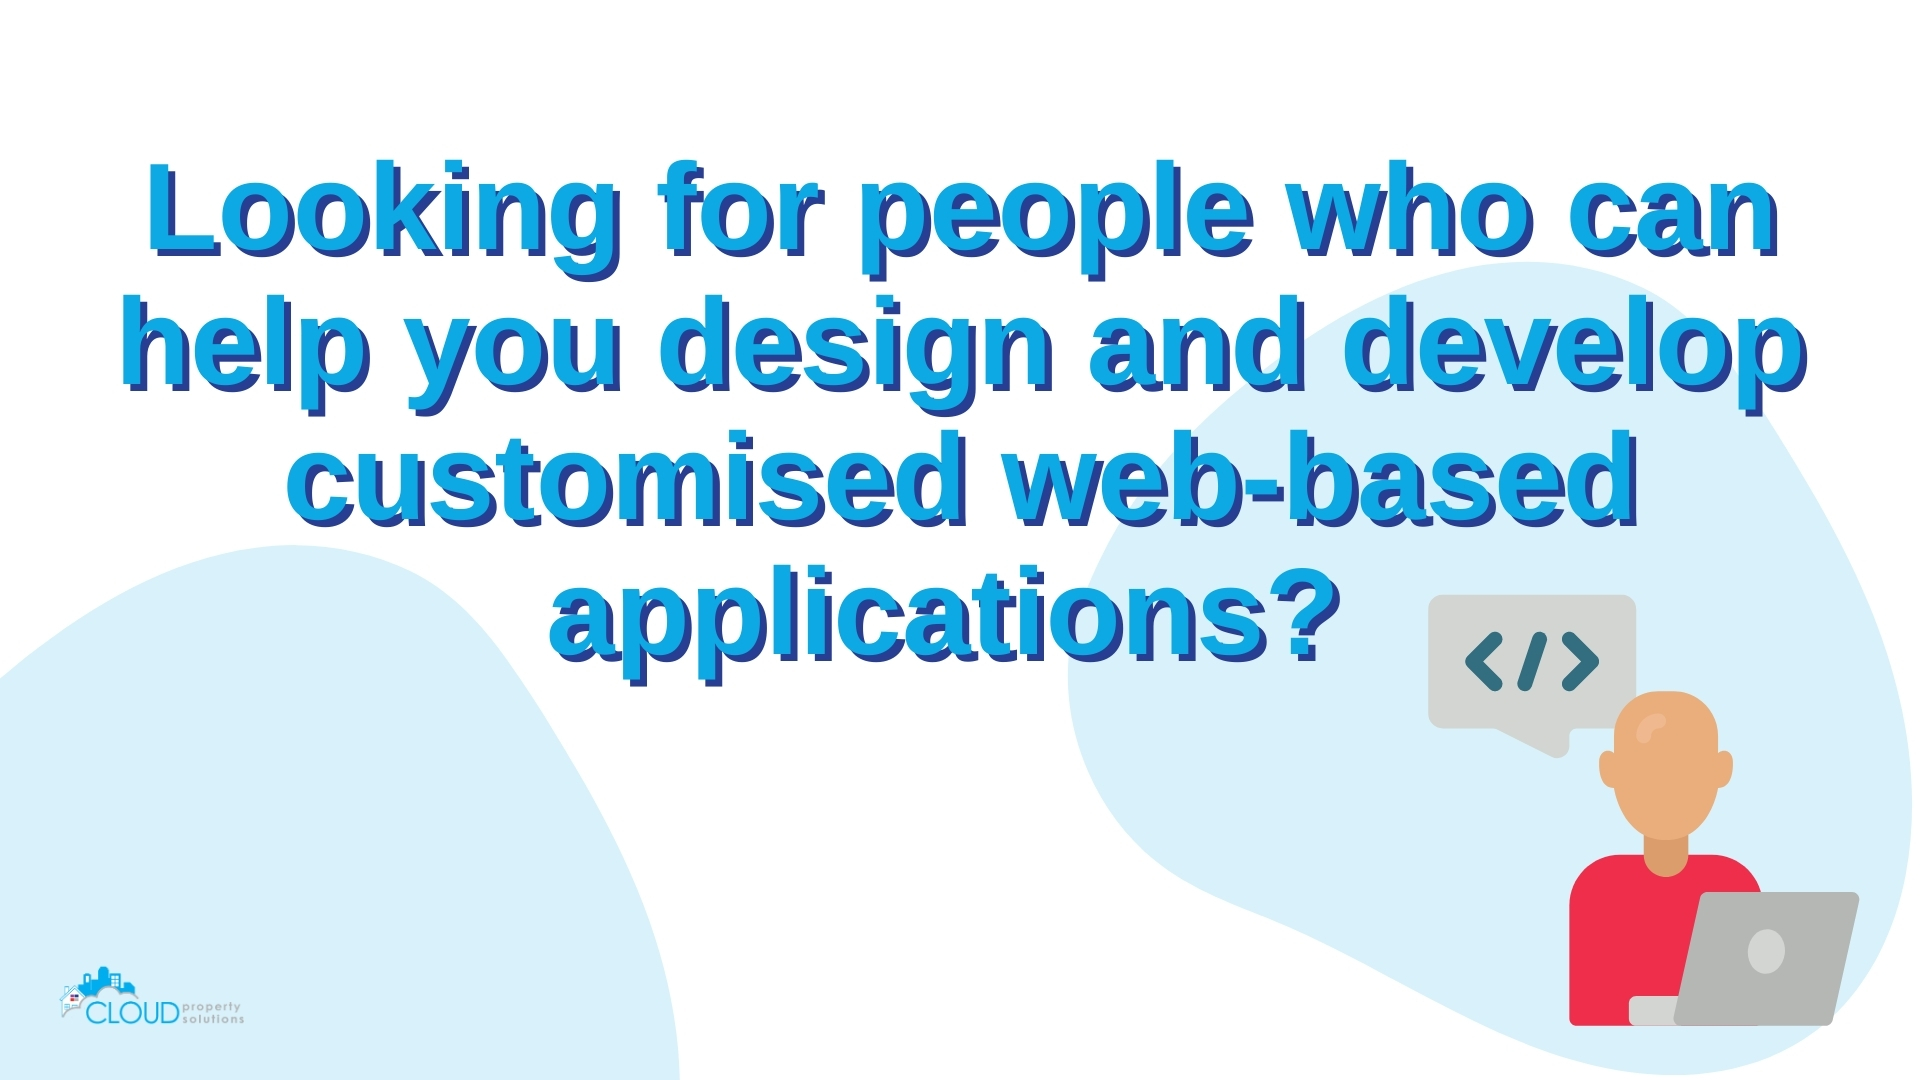 We can assist you in desiging and developing customised web-based applications.